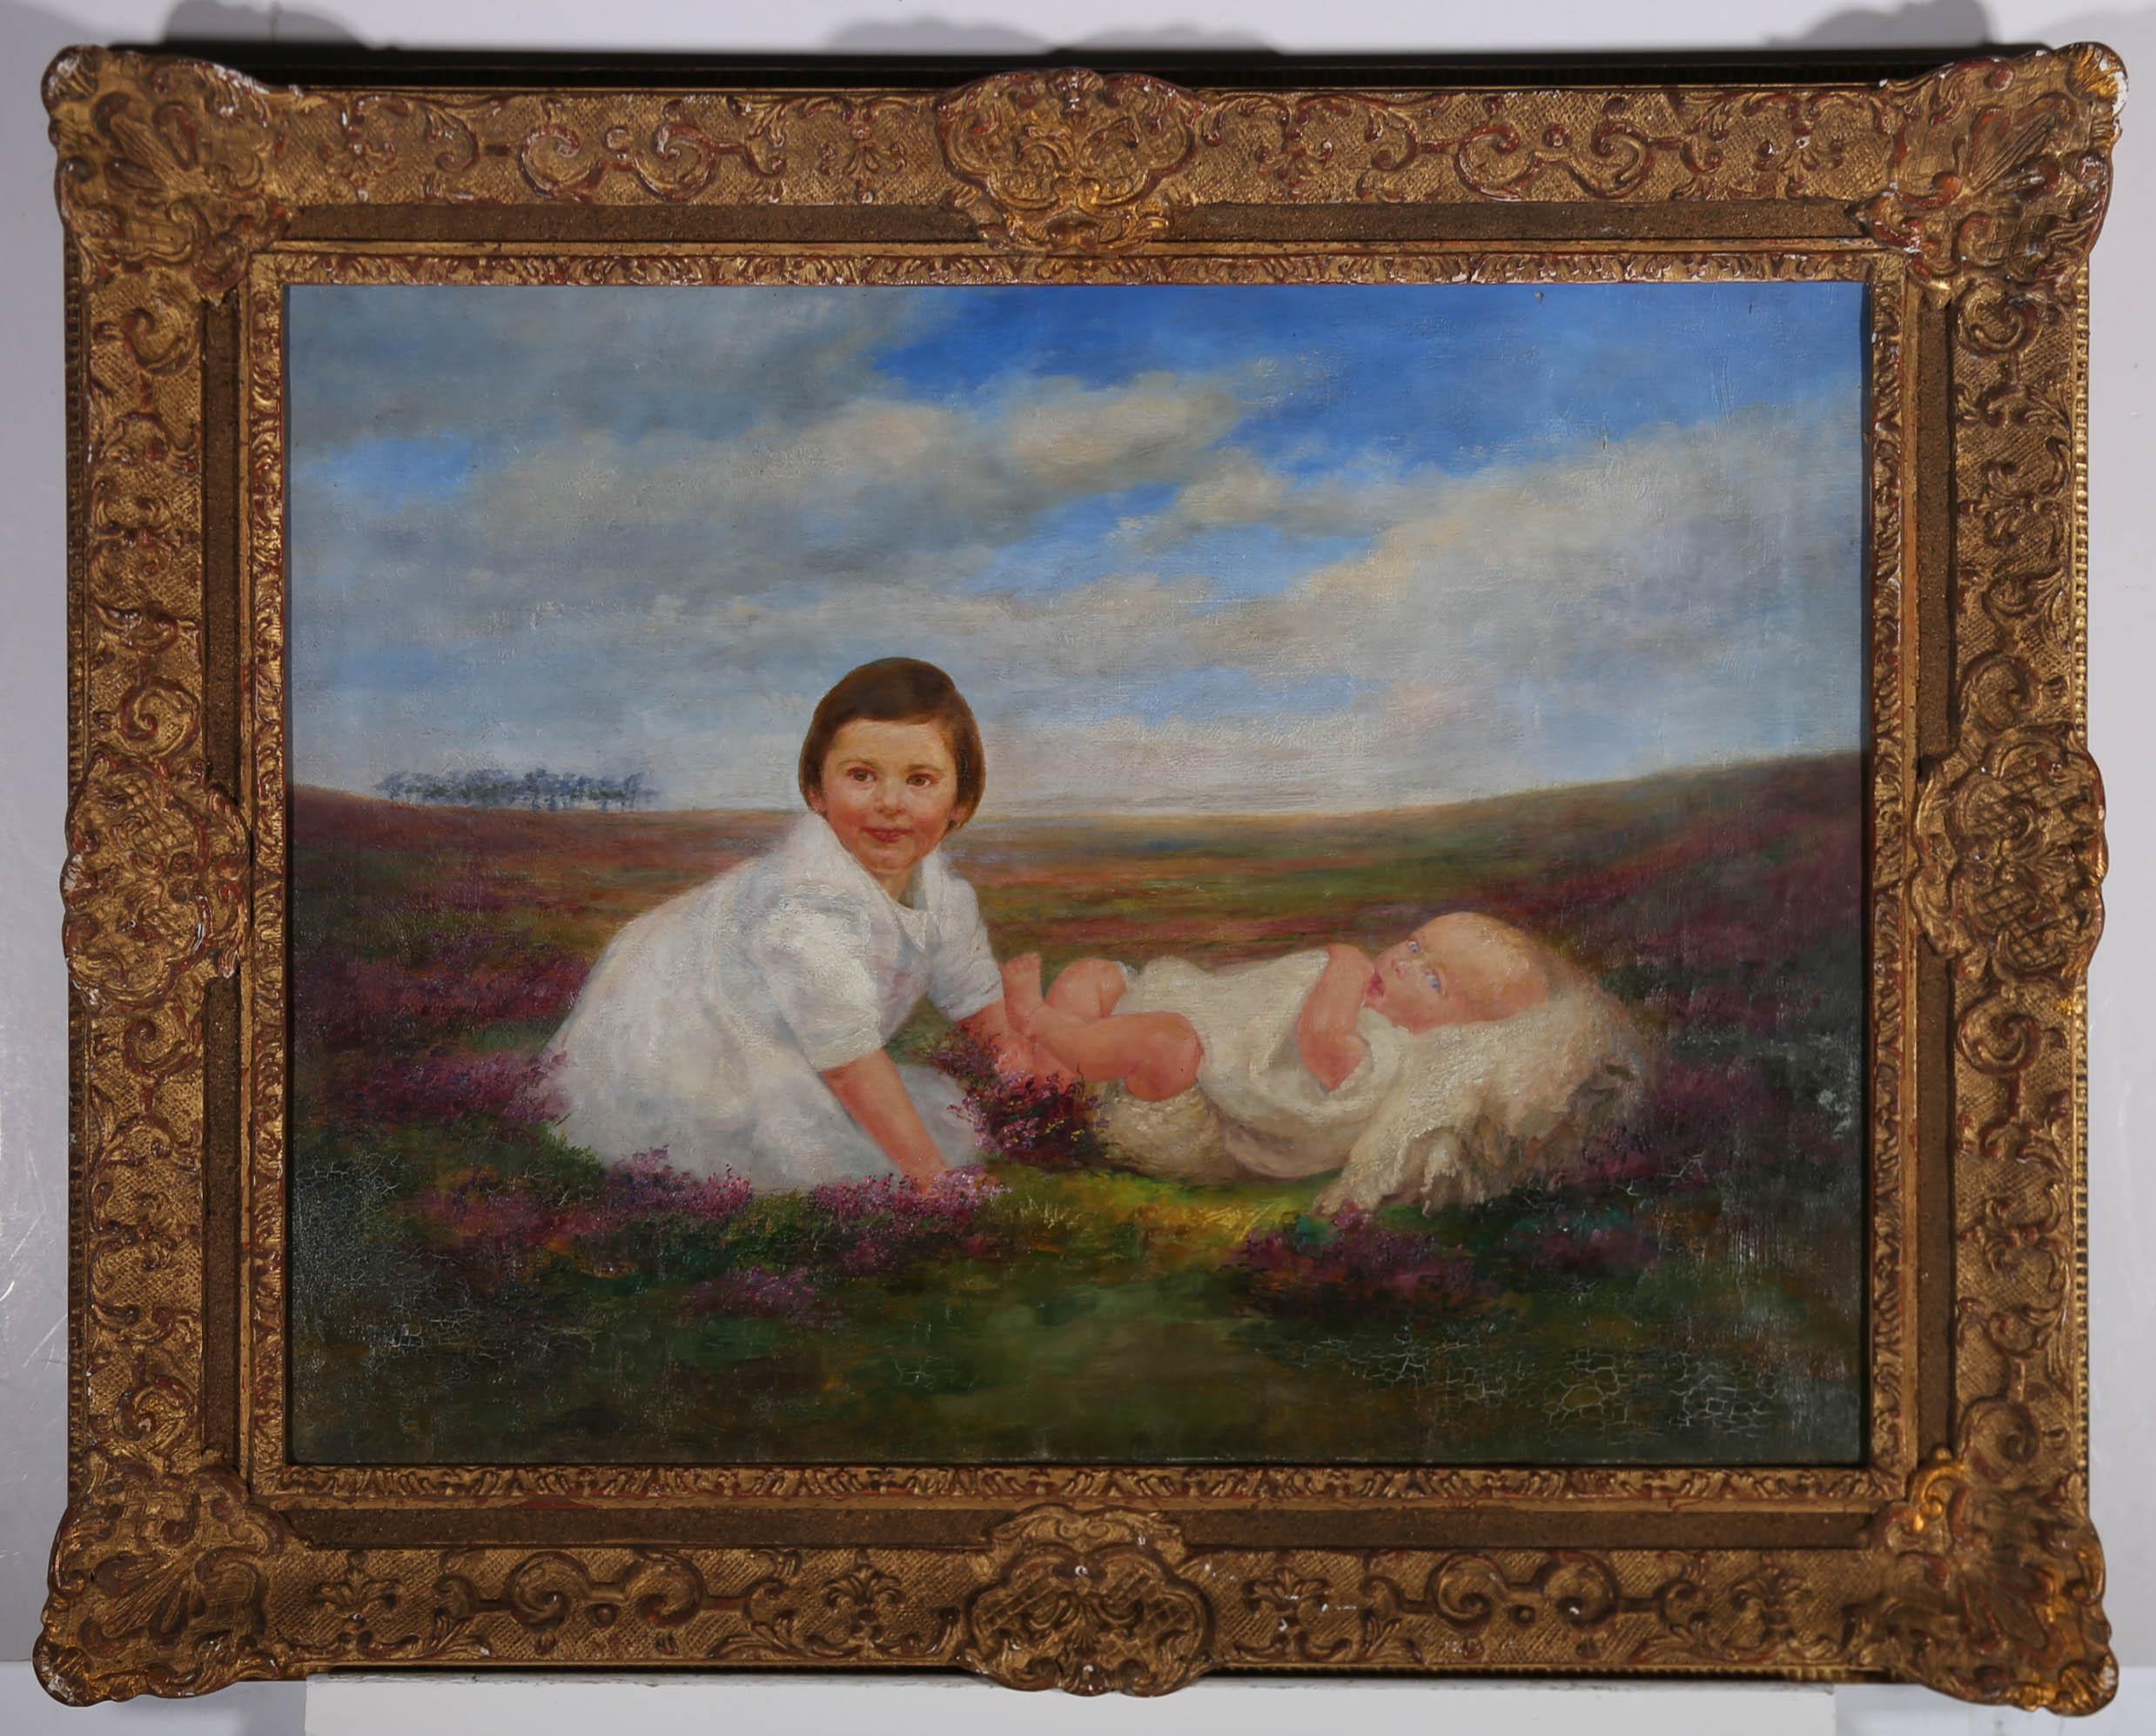 This early 19th century portrait depicts Ursula Margaret Nutt and Richard David Nutt as children. The infants are depicted against a vast landscape as they sit in the heather. Inscribed to the reverse with artist name and title. Presented in an